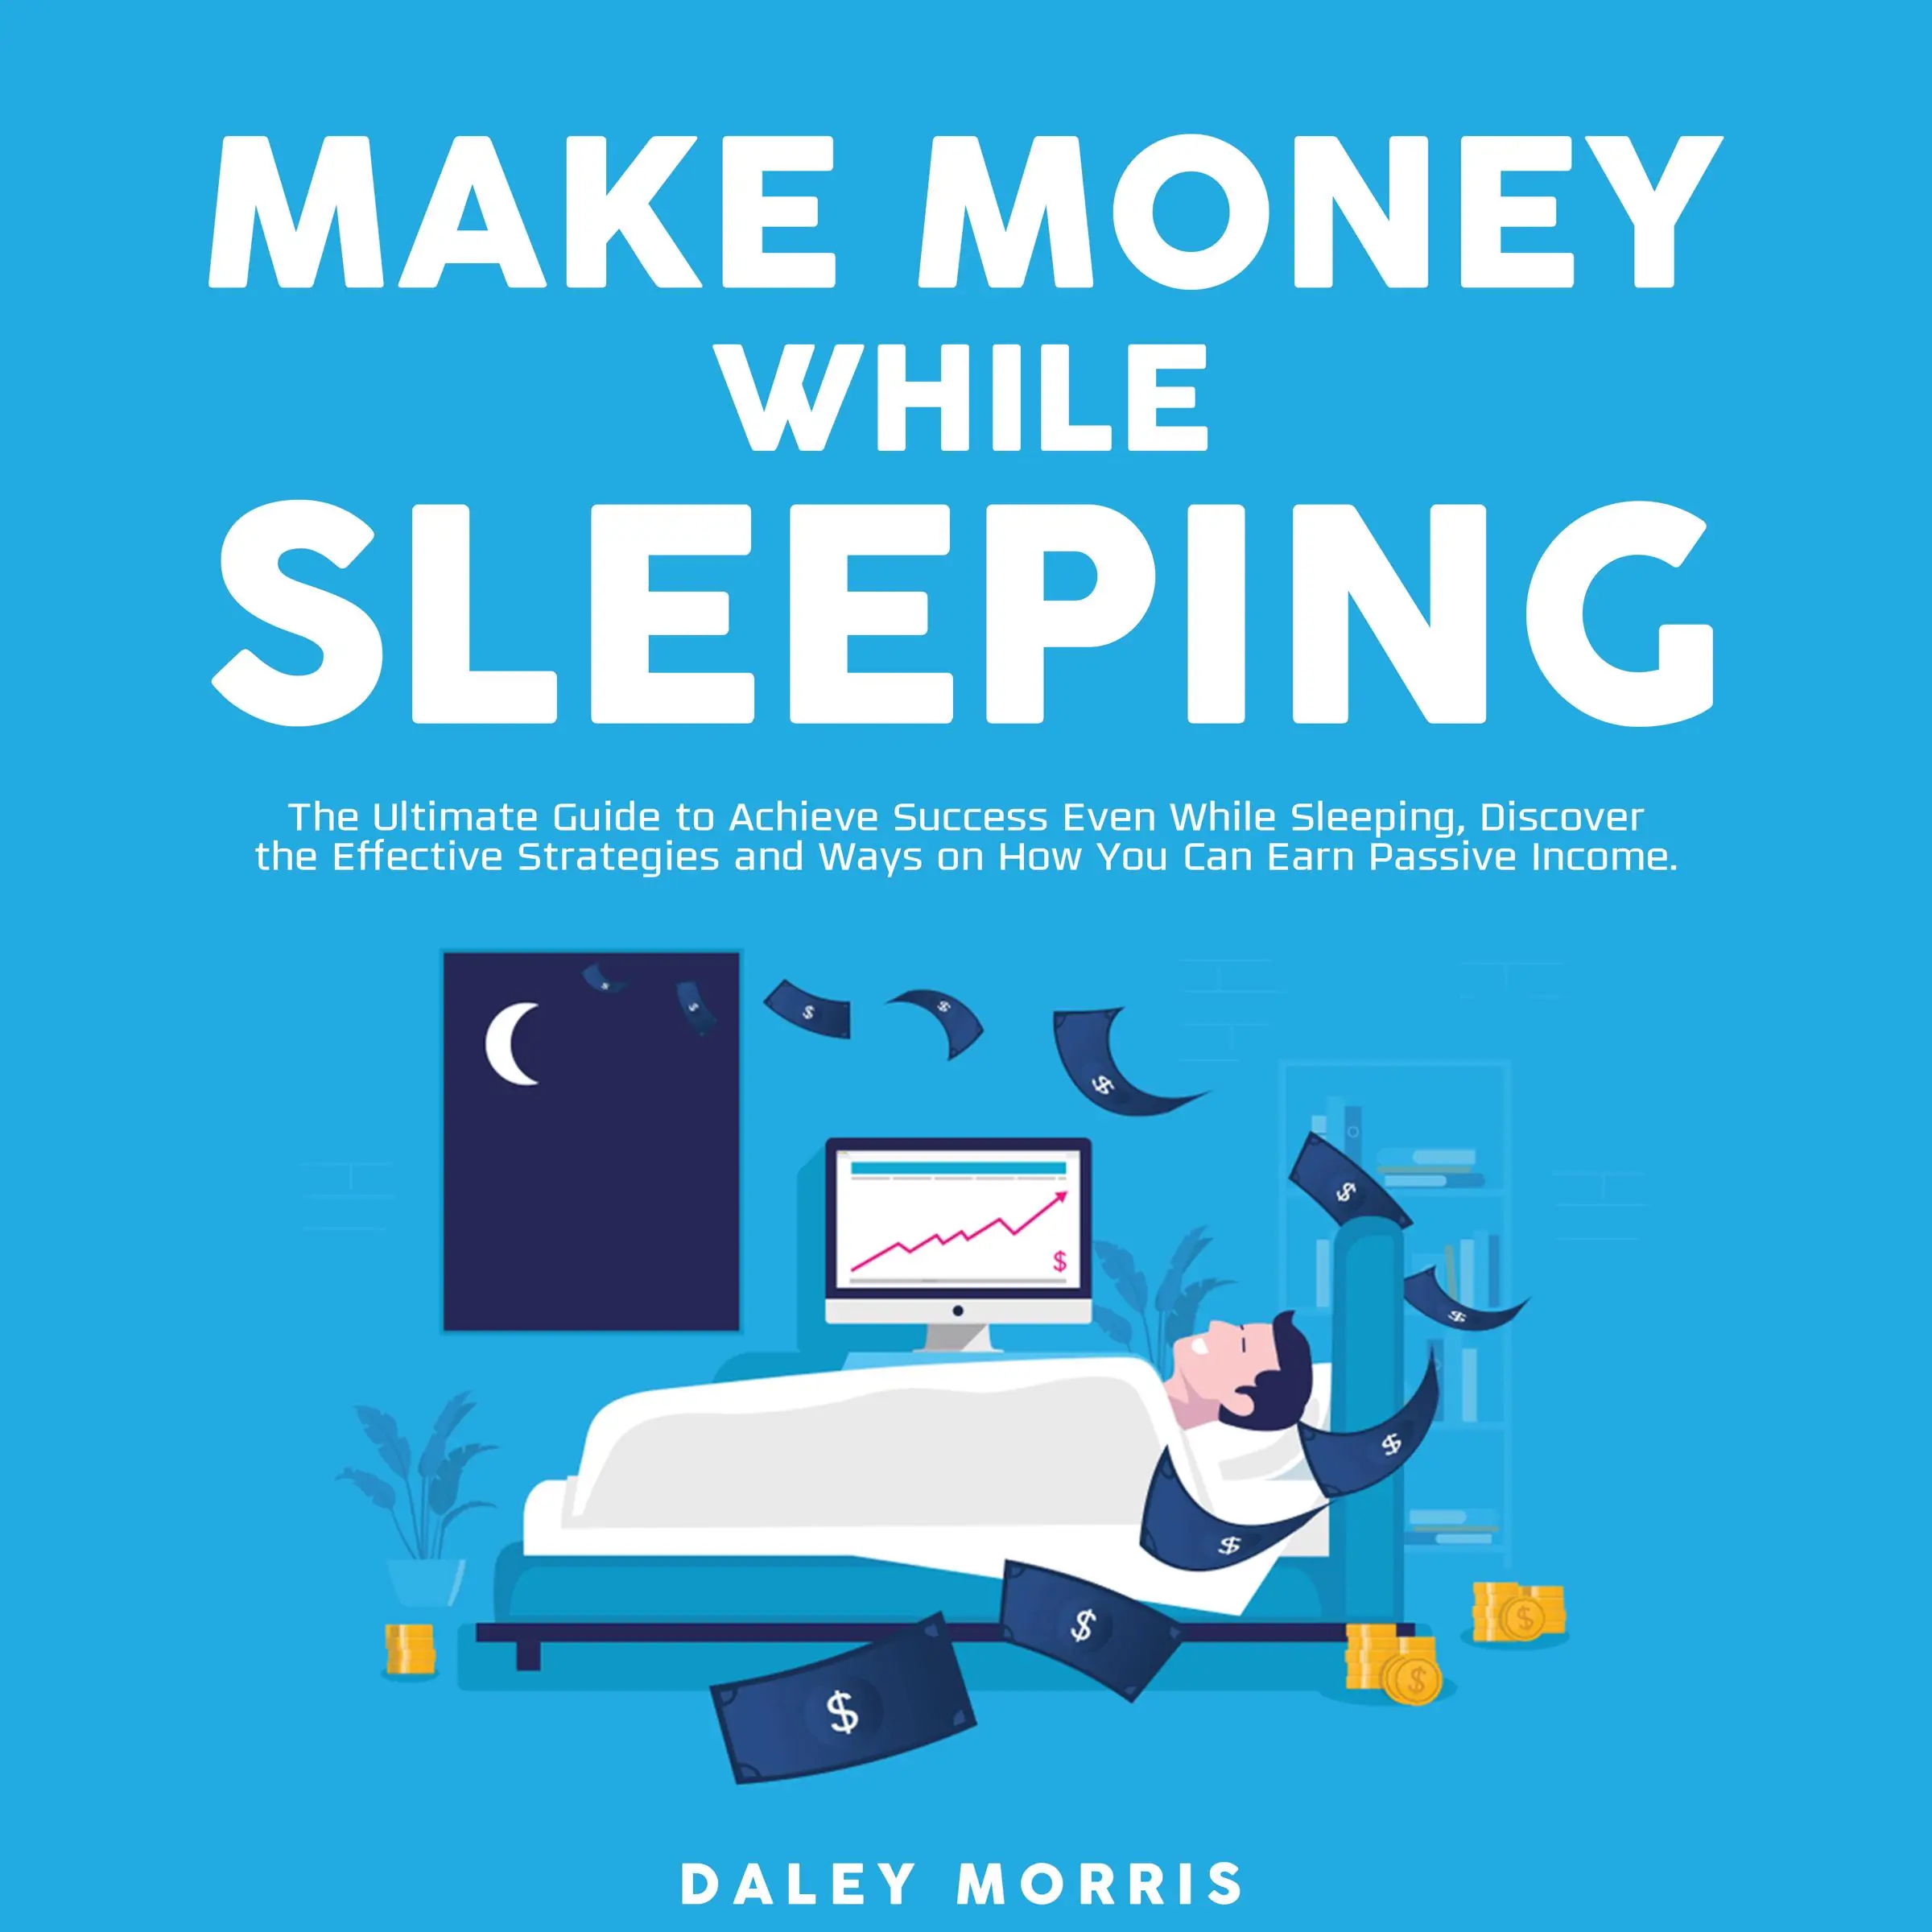 Make Money While Sleeping : The Ultimate Guide to Achieve Success Even While Sleeping, Discover the Effective Strategies and Ways on How You Can Earn Passive Income by Daley Morris Audiobook